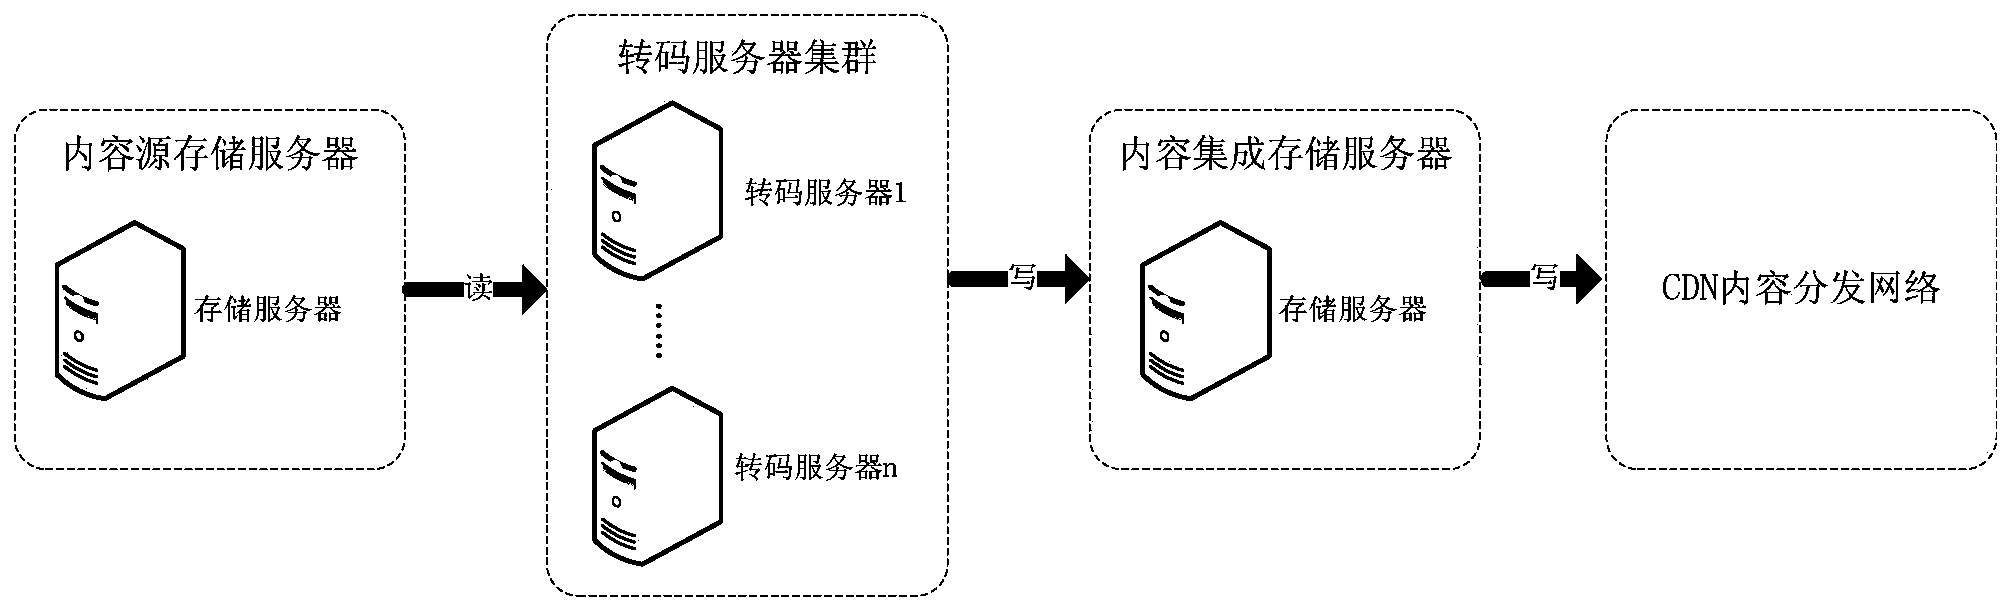 Distributed transcoding system and method based on digital television